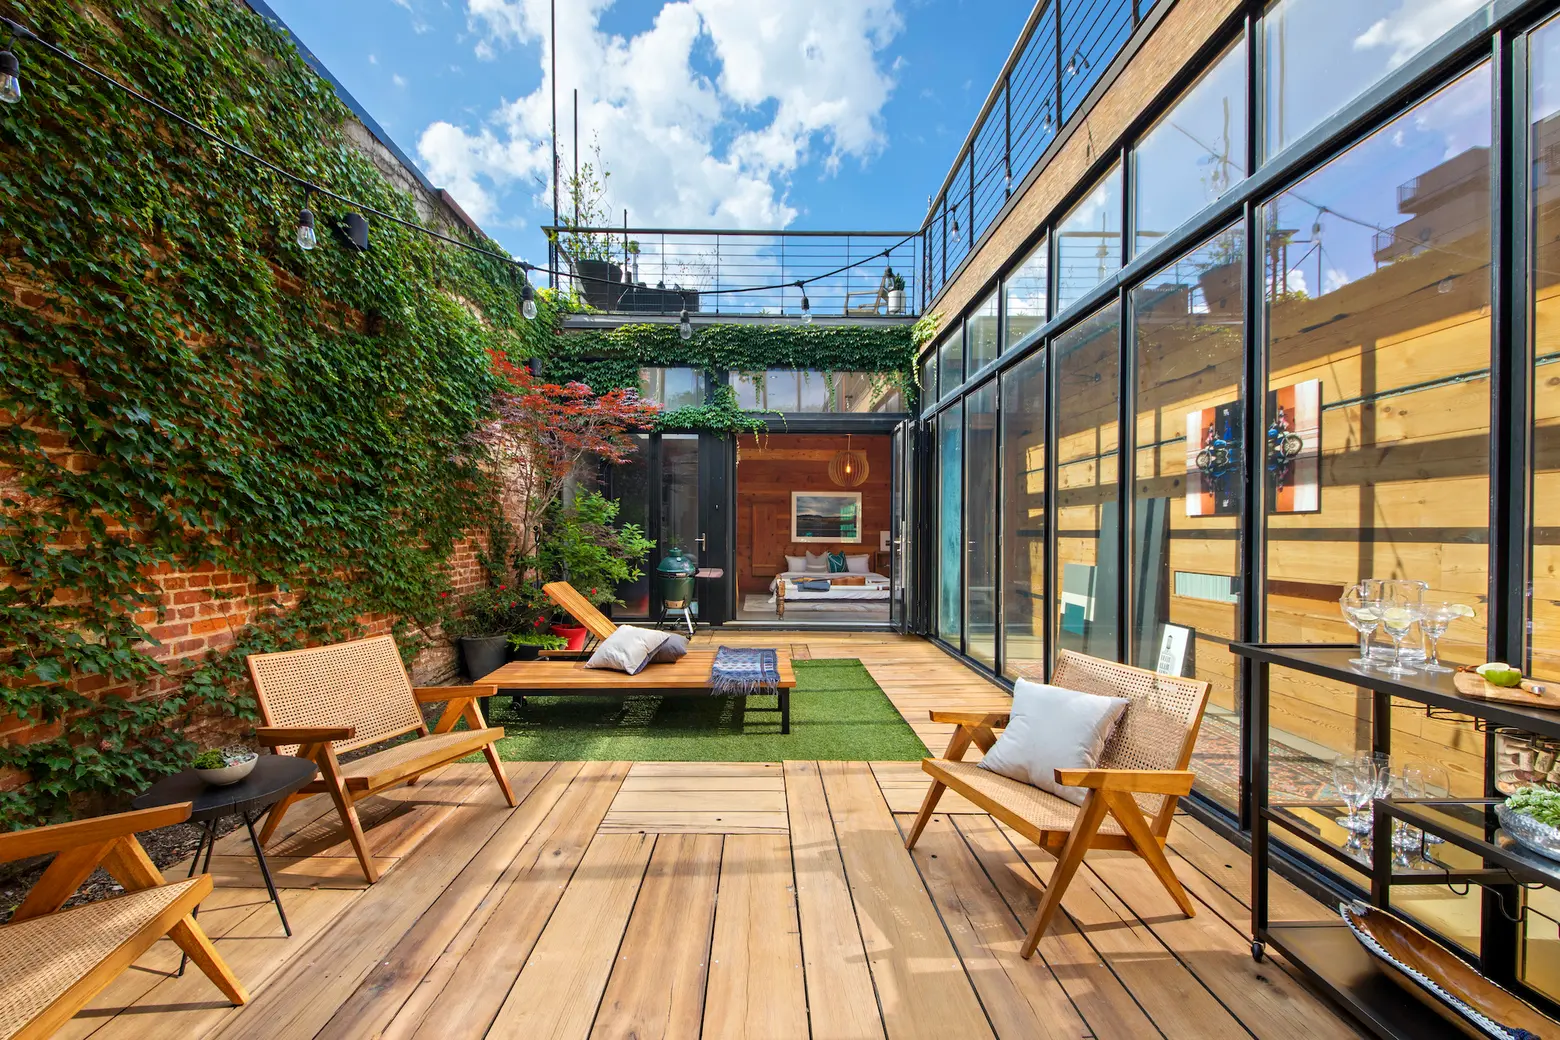 ‘Blue’s Clues’ host Steve Burns lists his playful, converted-garage in Williamsburg for $3.35M